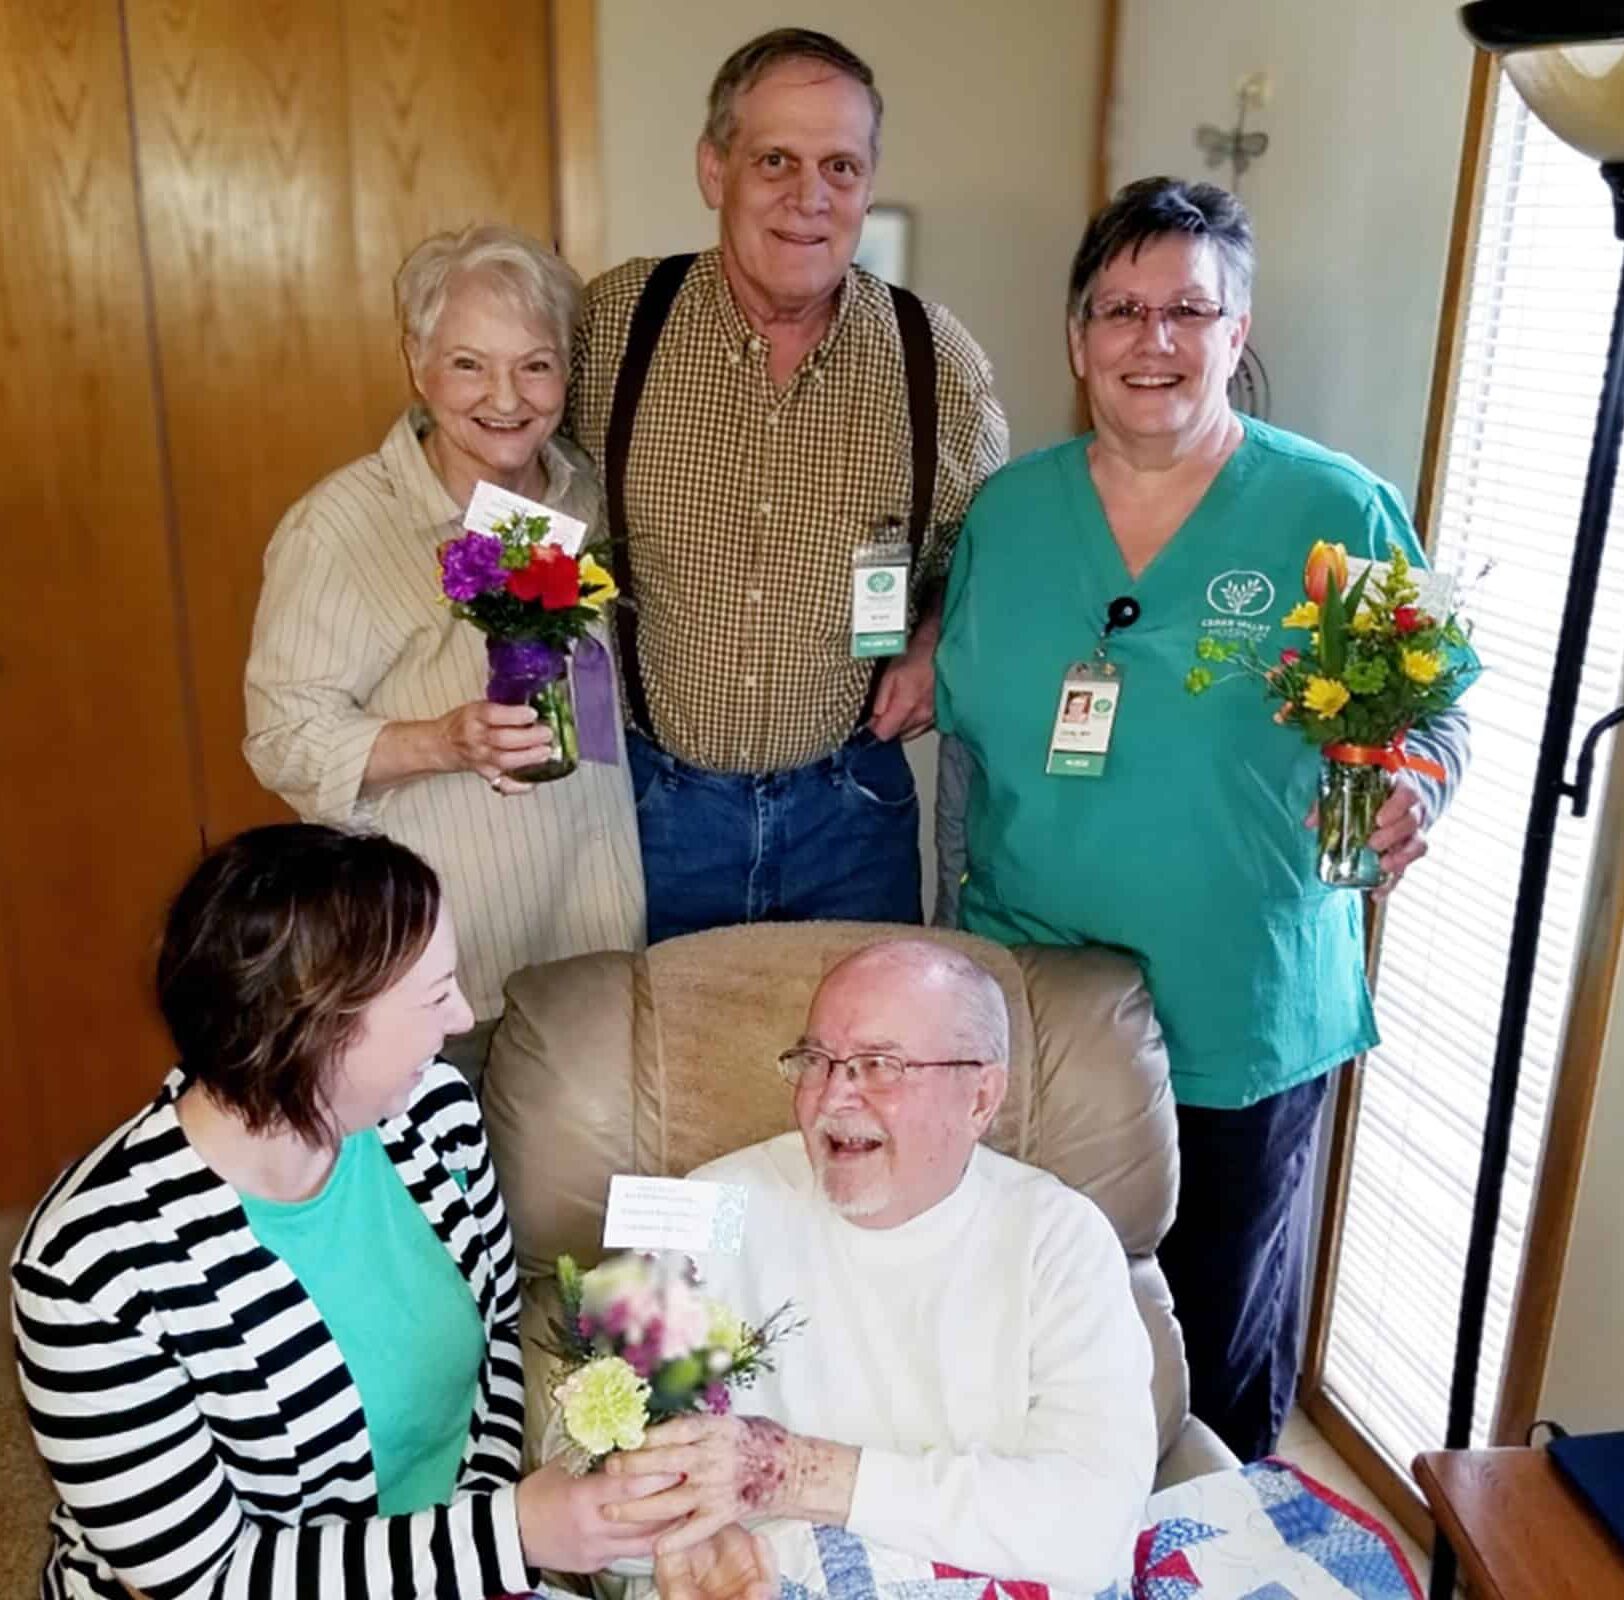 Caregiver smiling with patient and patient's family